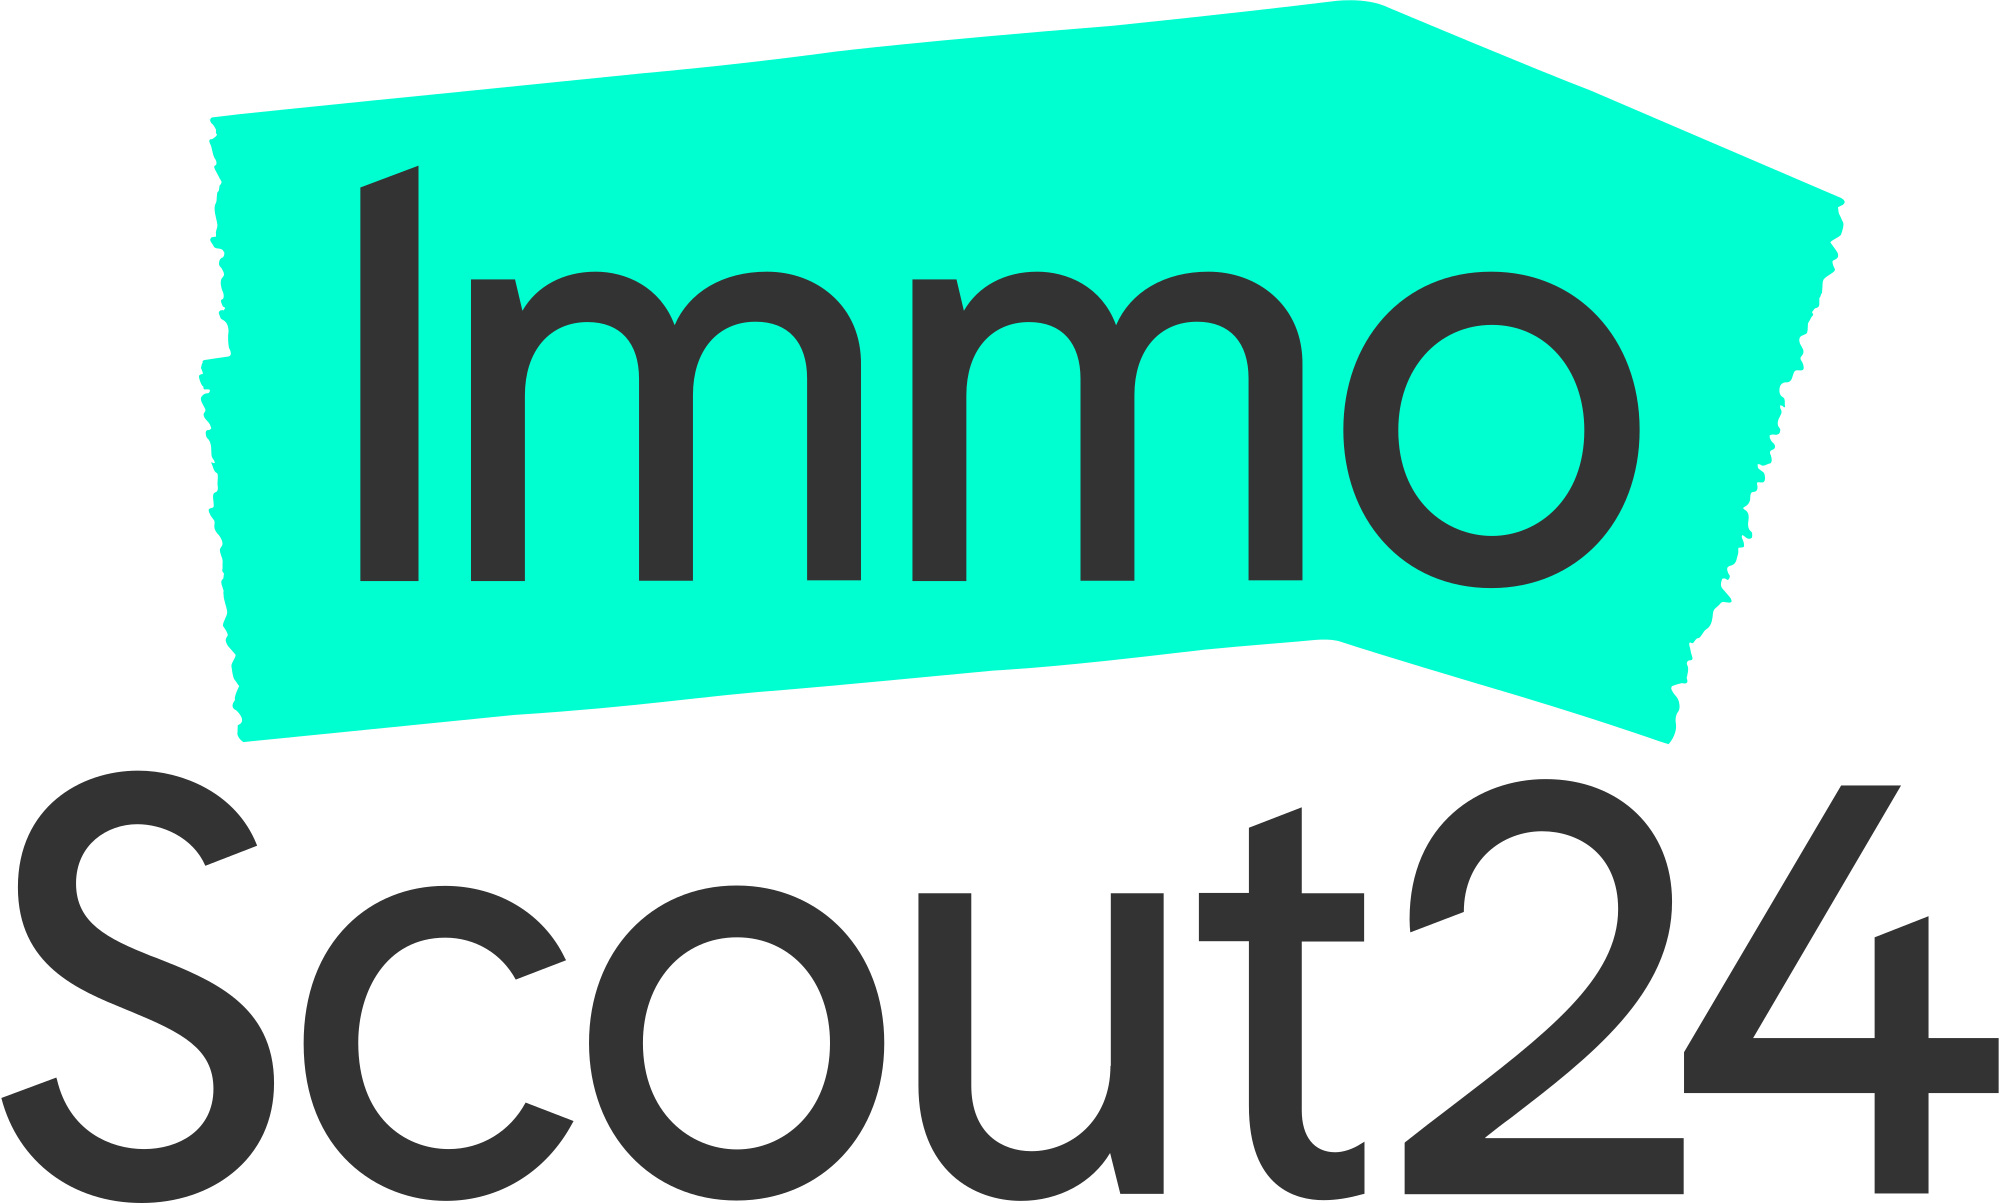 ImmoScout 24 Logo